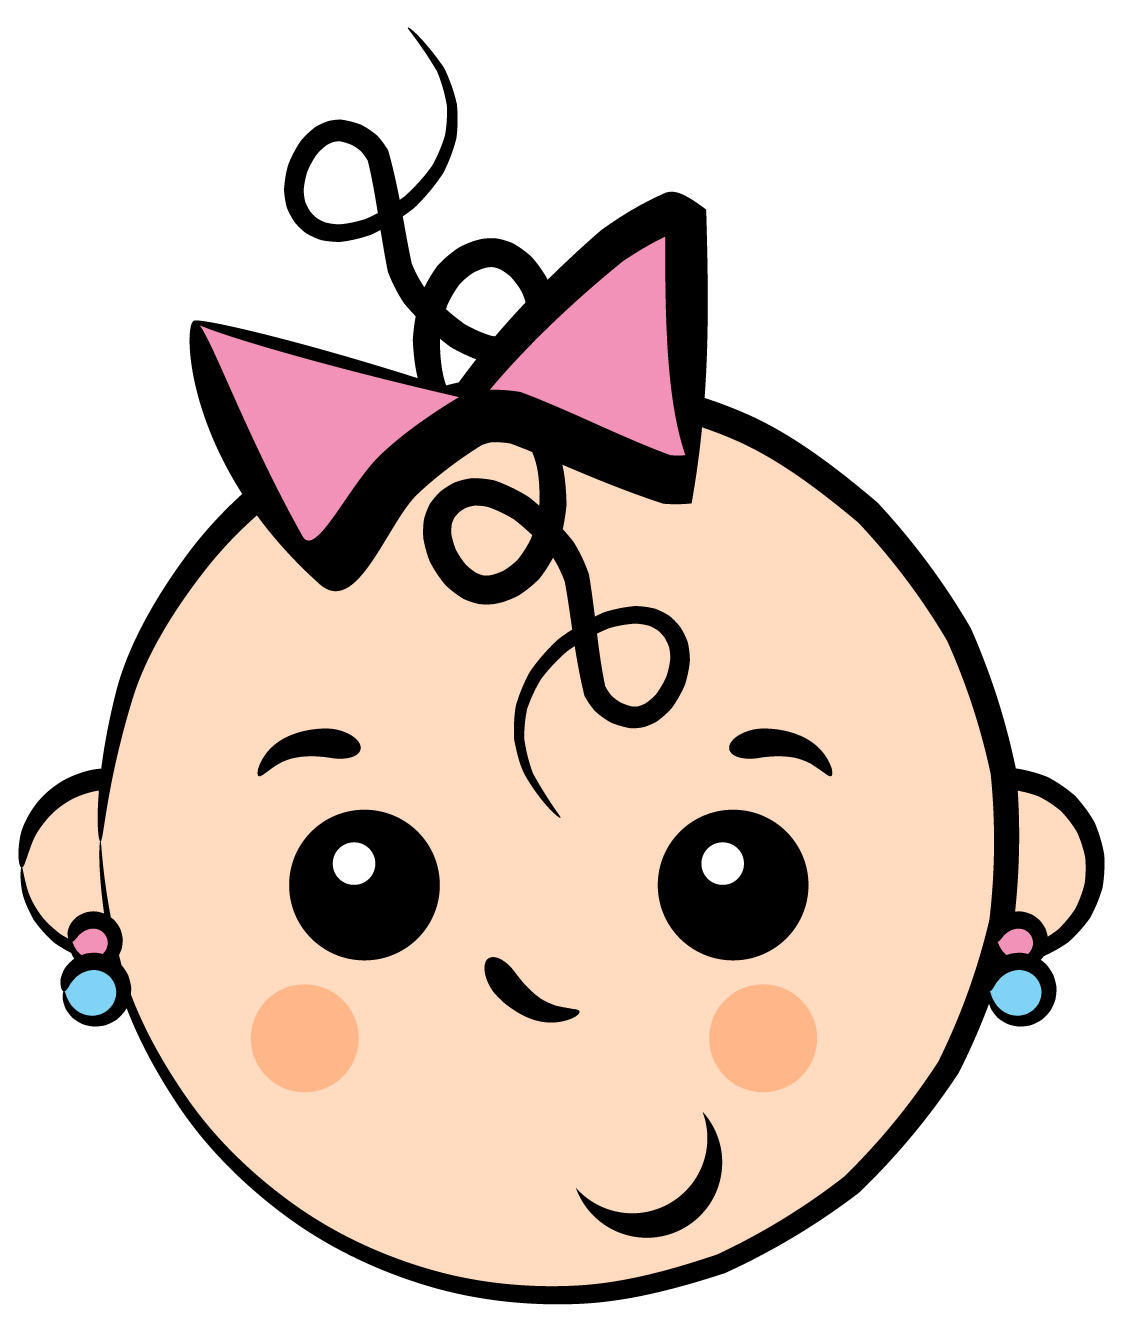 free clipart of girl - photo #33